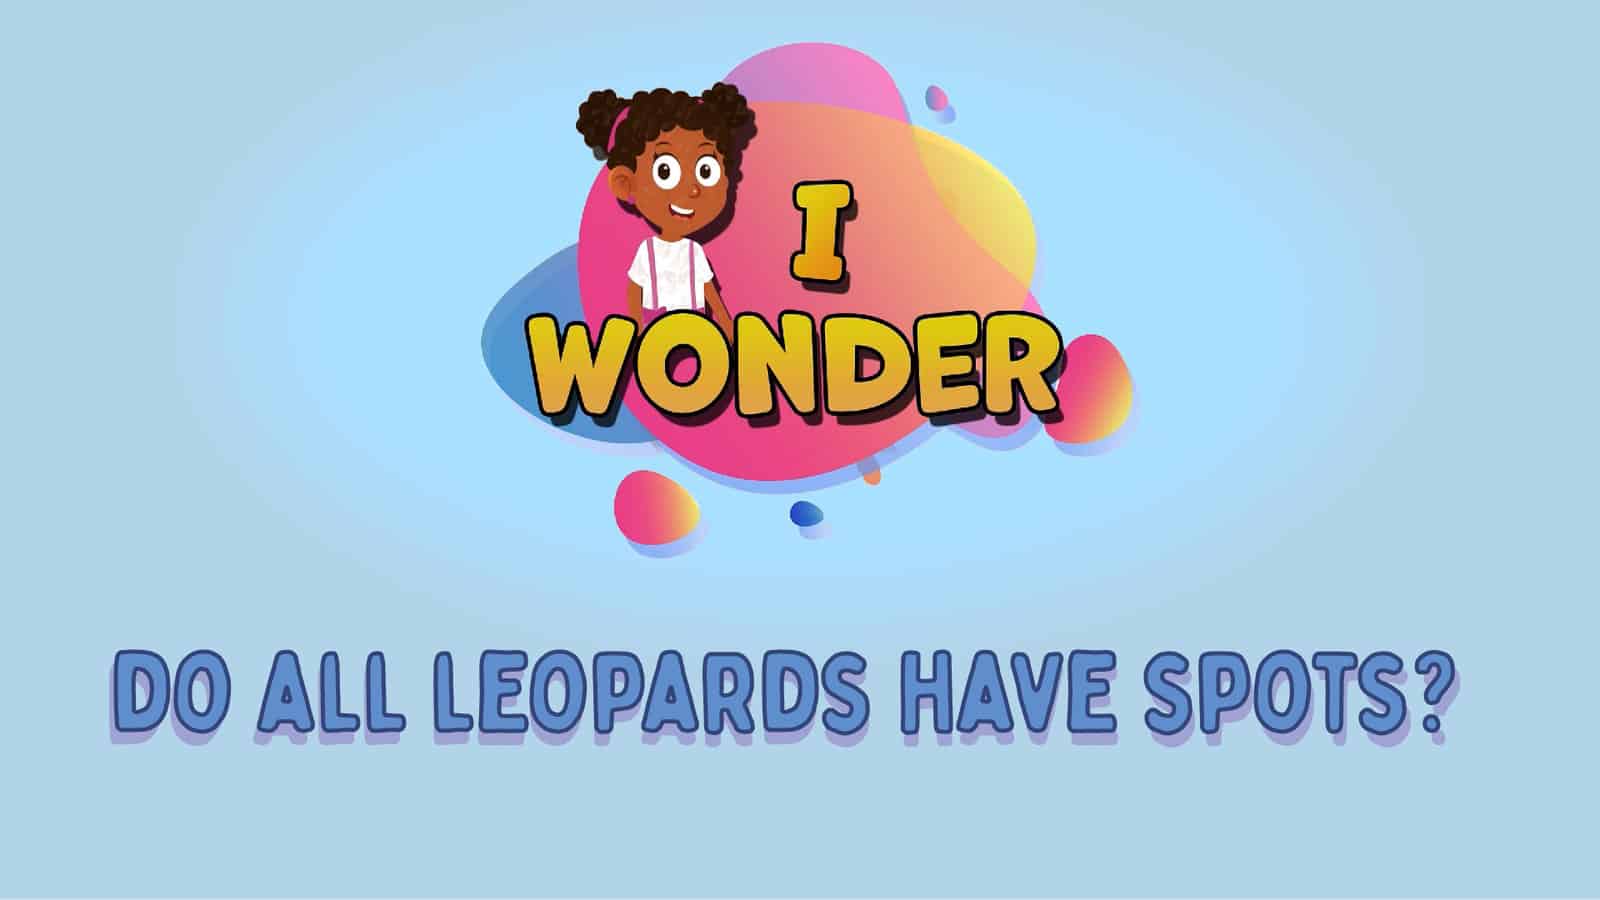 Do All Leopards Have Spots?